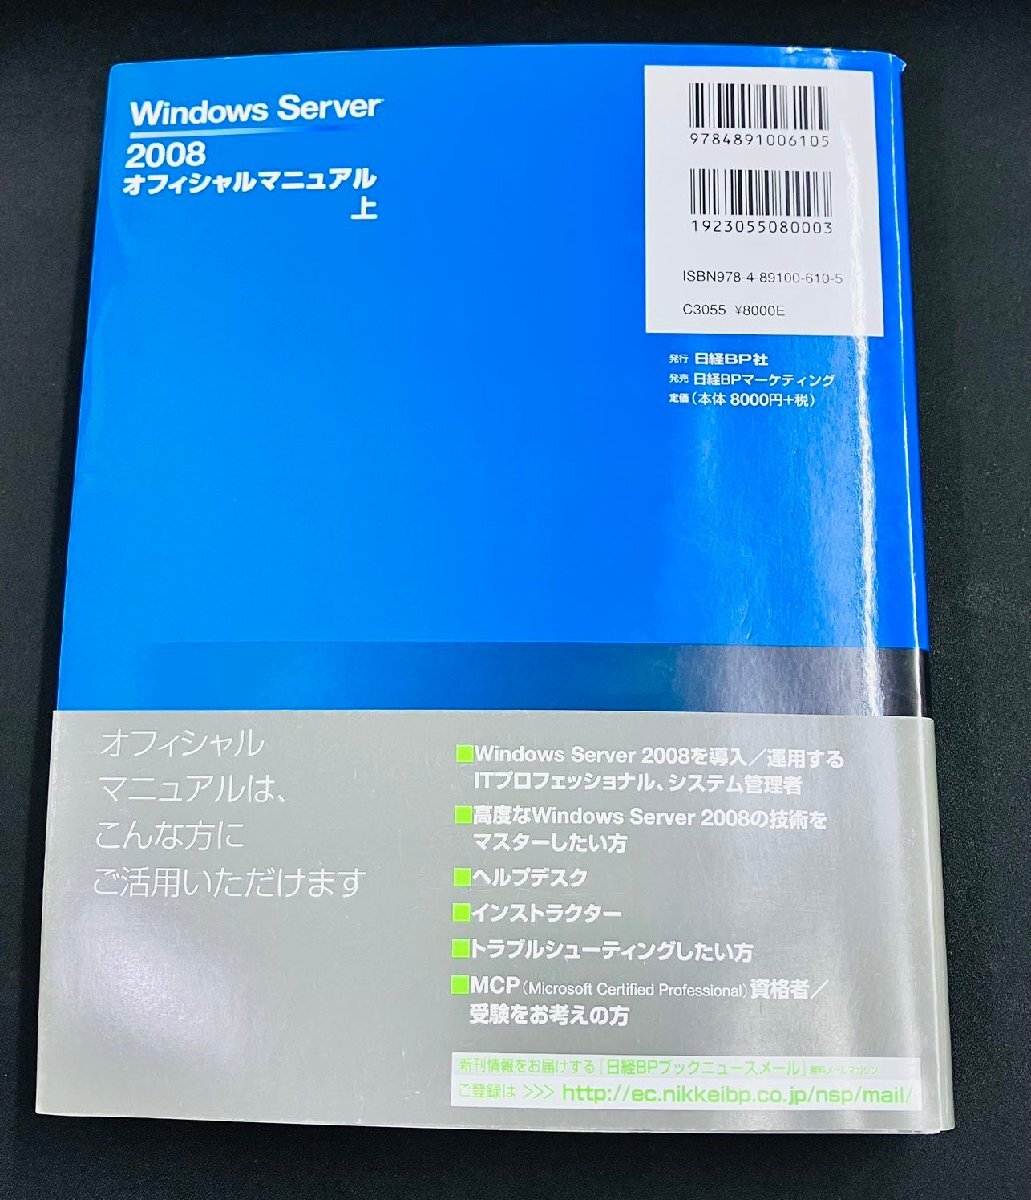 YS0269* secondhand goods *Windows Server 2008 official manual on ( Microsoft official manual ) CD-ROM attaching 